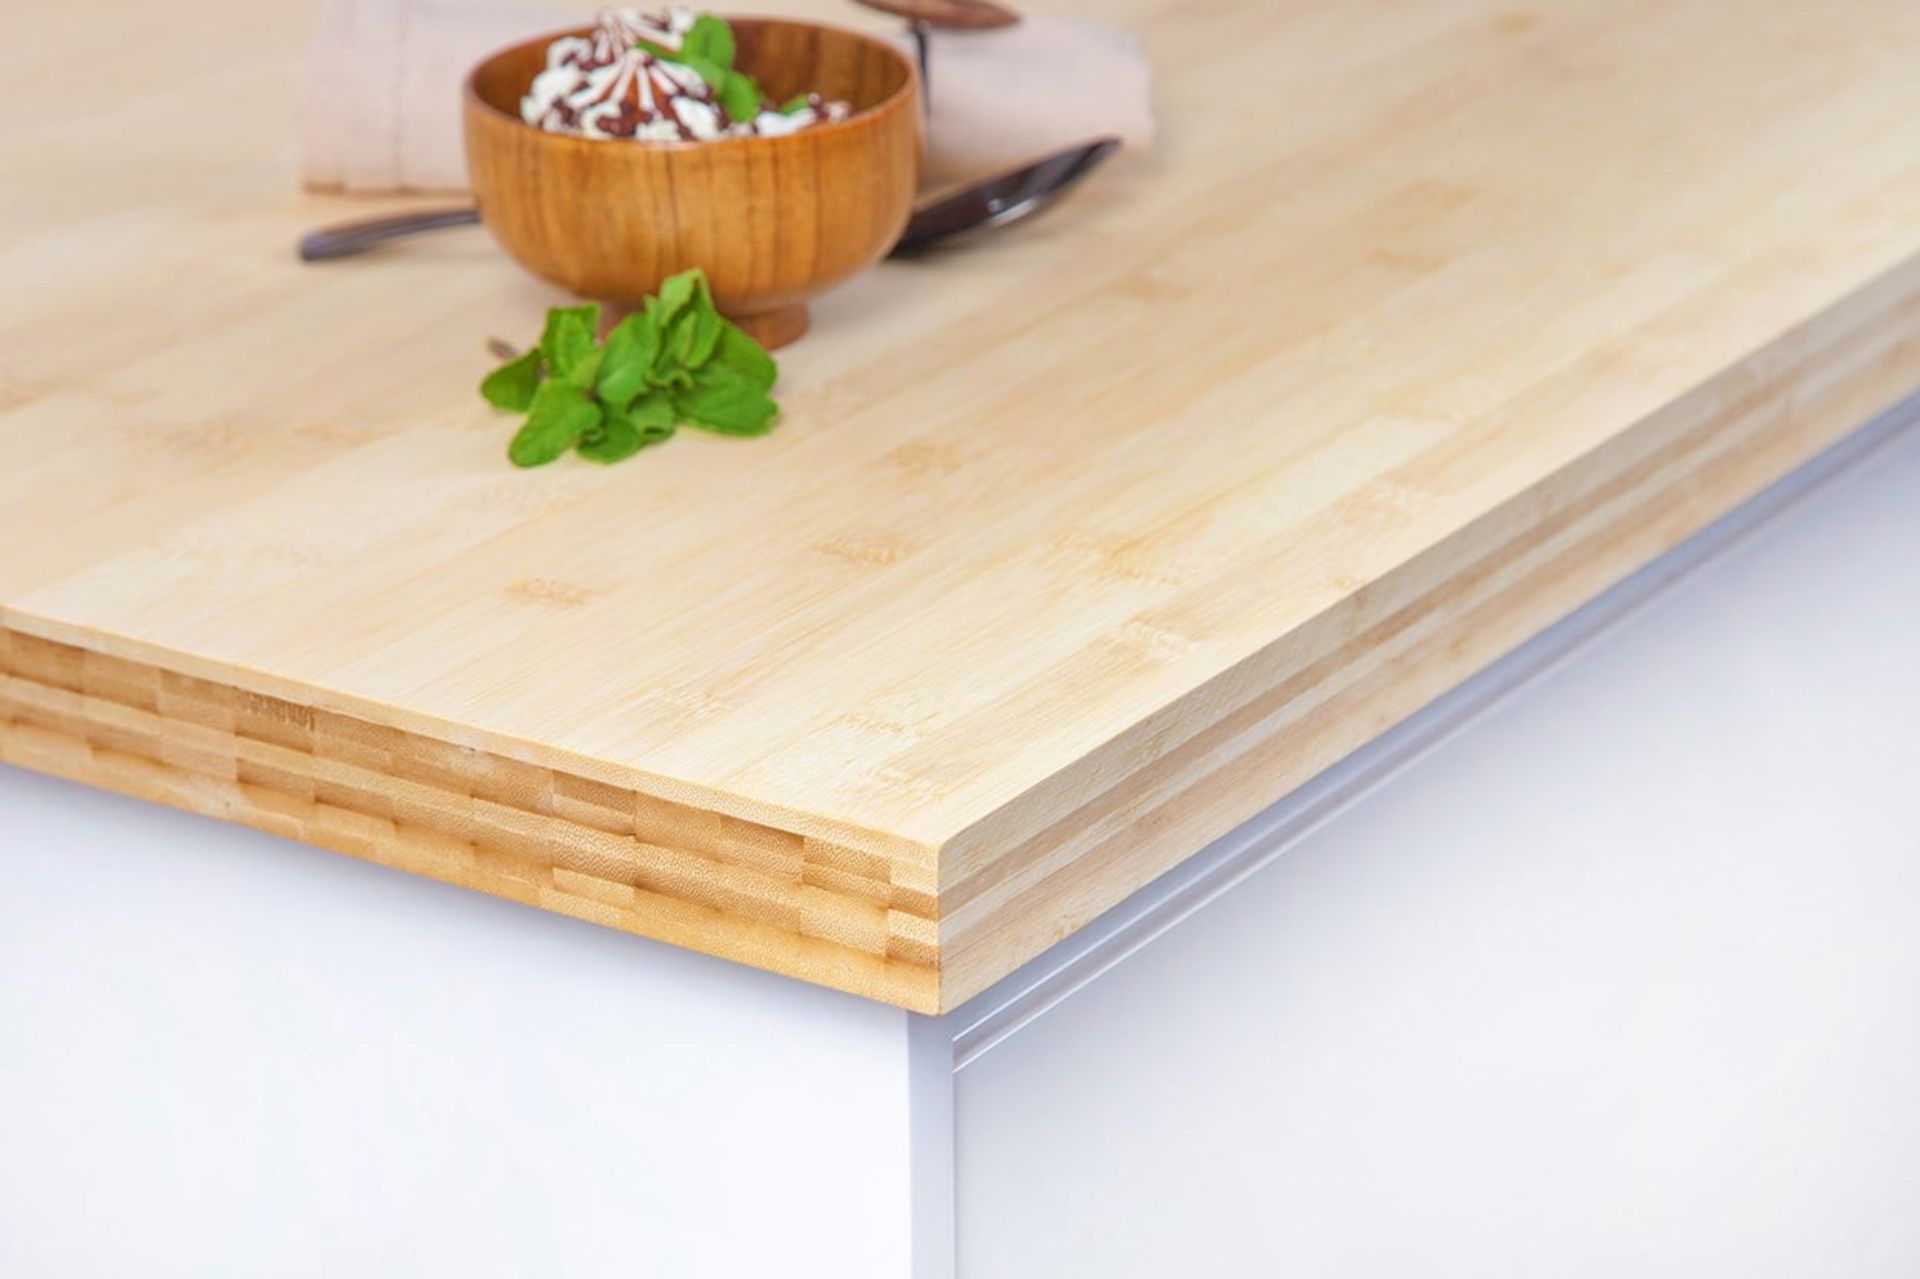 5 x Layered Solid Bamboo Wood Kitchen Worktops - Sizes Include: 3000x650, 4000x650 and 300x900mm - - Image 4 of 5